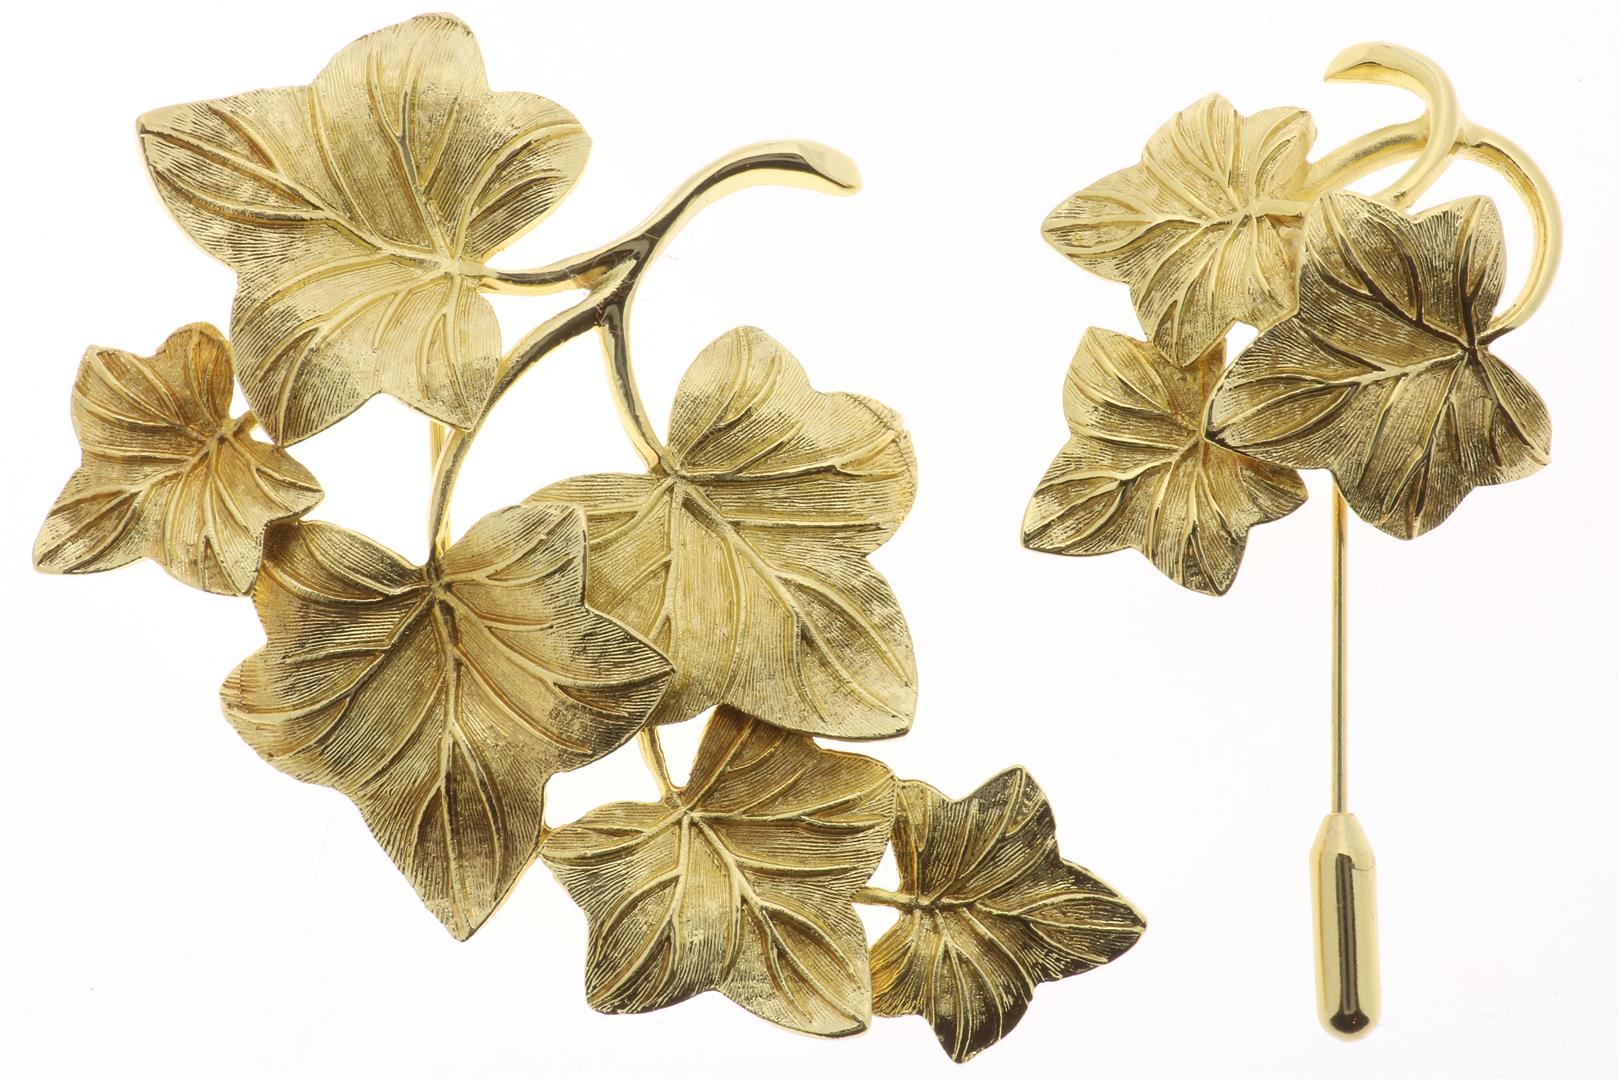 Two gold-plated brooches with ivy leaves, designed by Christiaan Dior in original box. 5 x 7.5, 6.